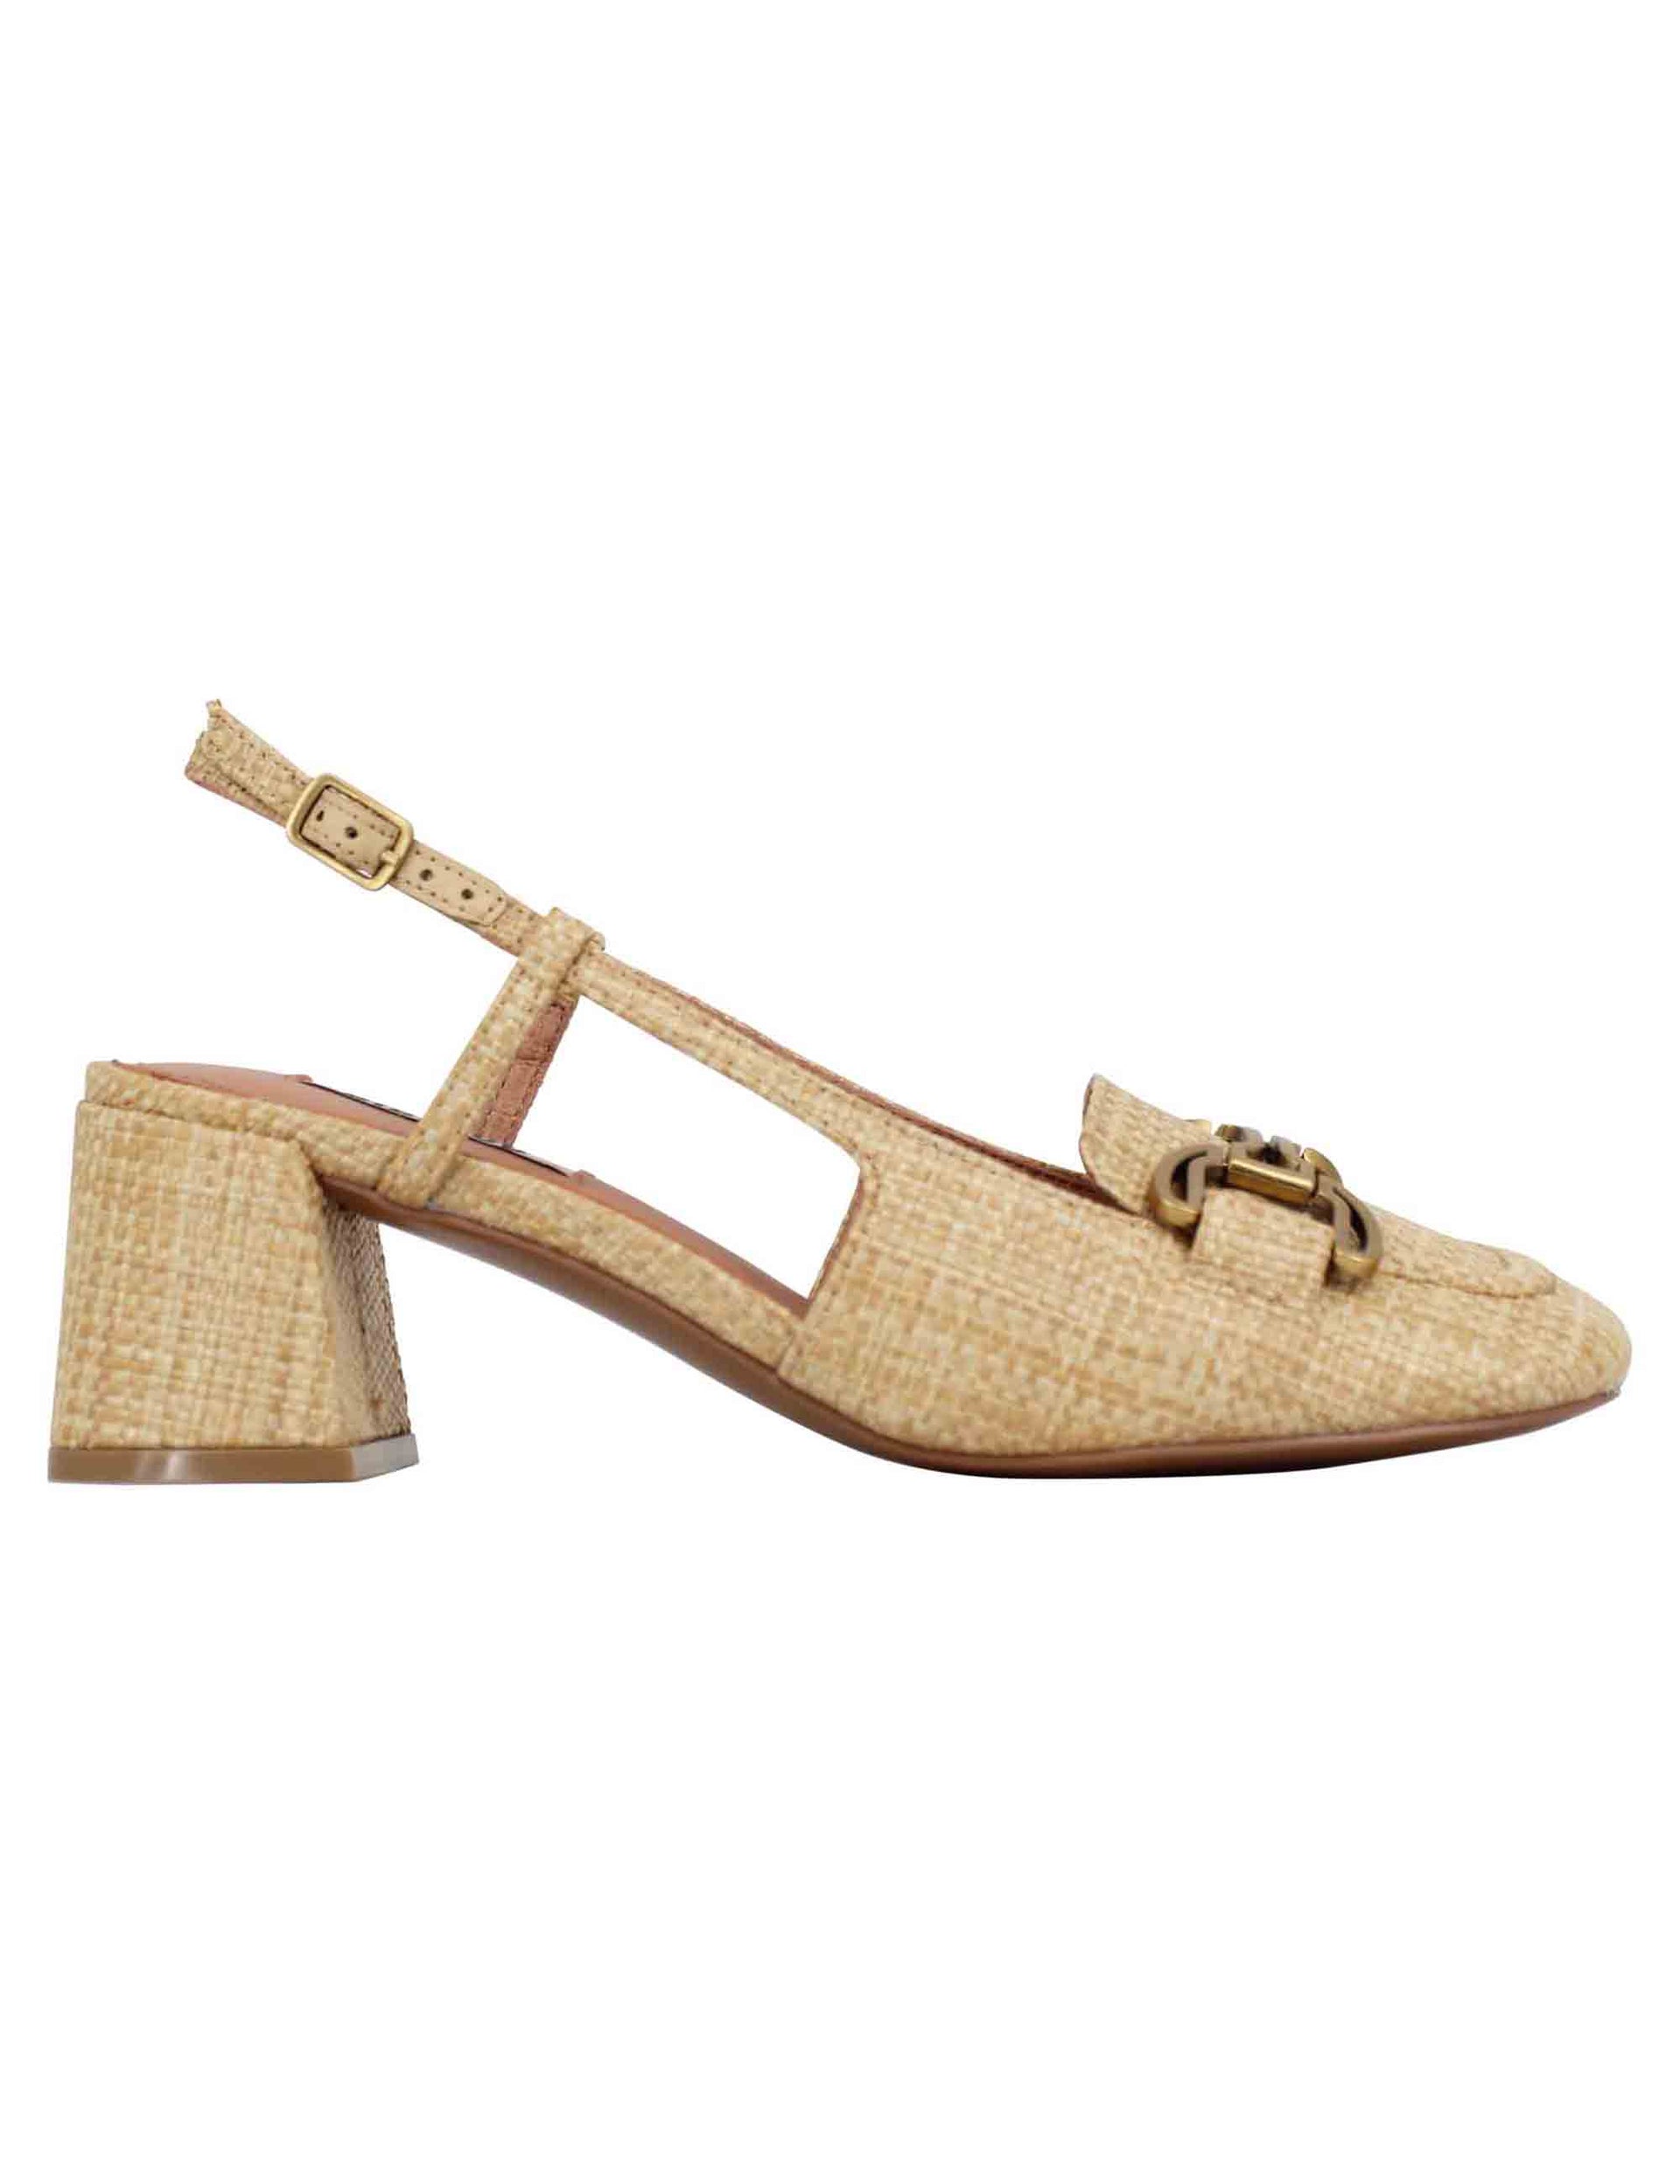 Women's slingback pumps in natural fabric with Renée buckle